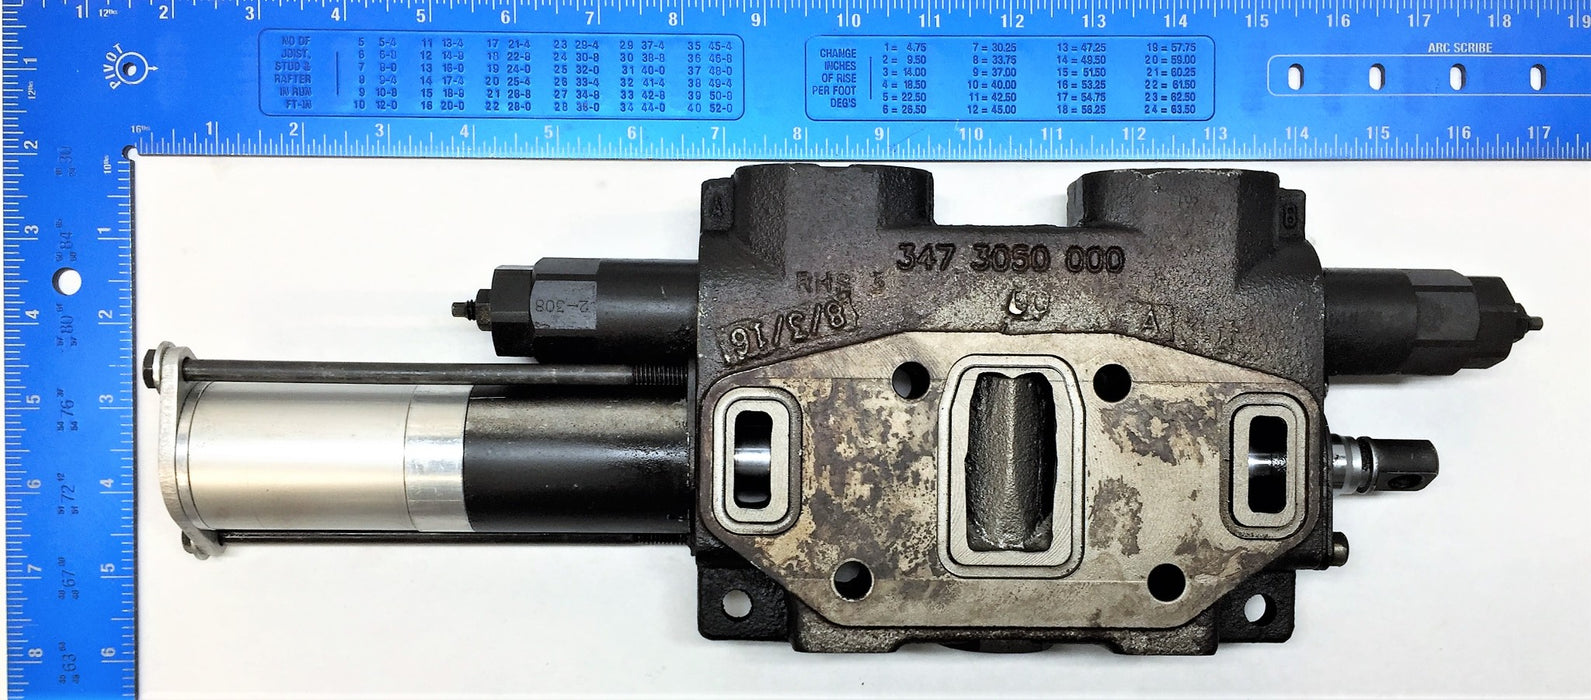 PARKER HANIFIN Directional Control Valve 347 3050 000 USED